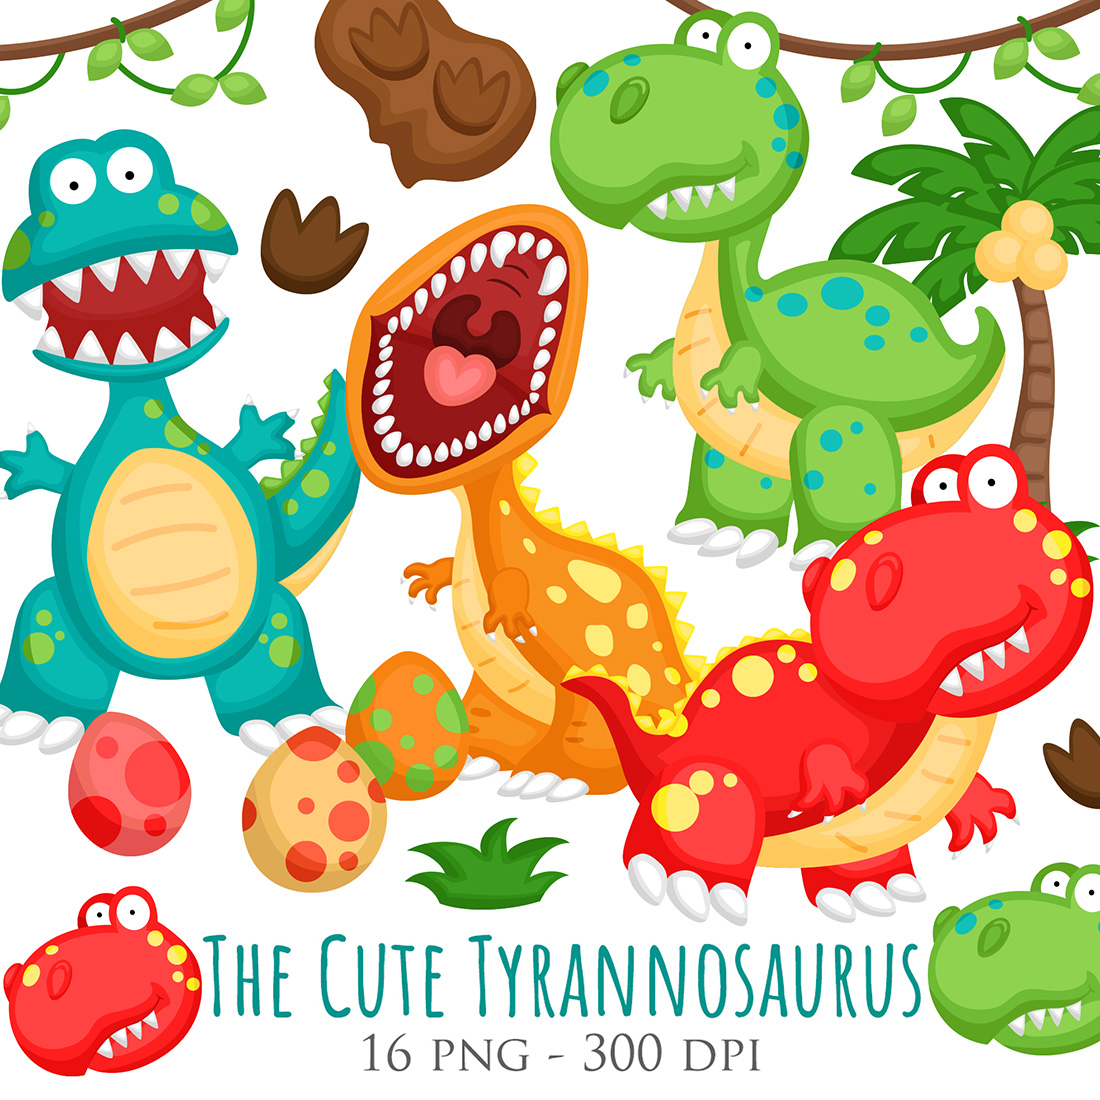 Colorful Cute and Funny Animal Dinosaur Tryannosaurus Trex Ancient Cartoon Illustration Vector Clipart Sticker Background Decoration cover image.